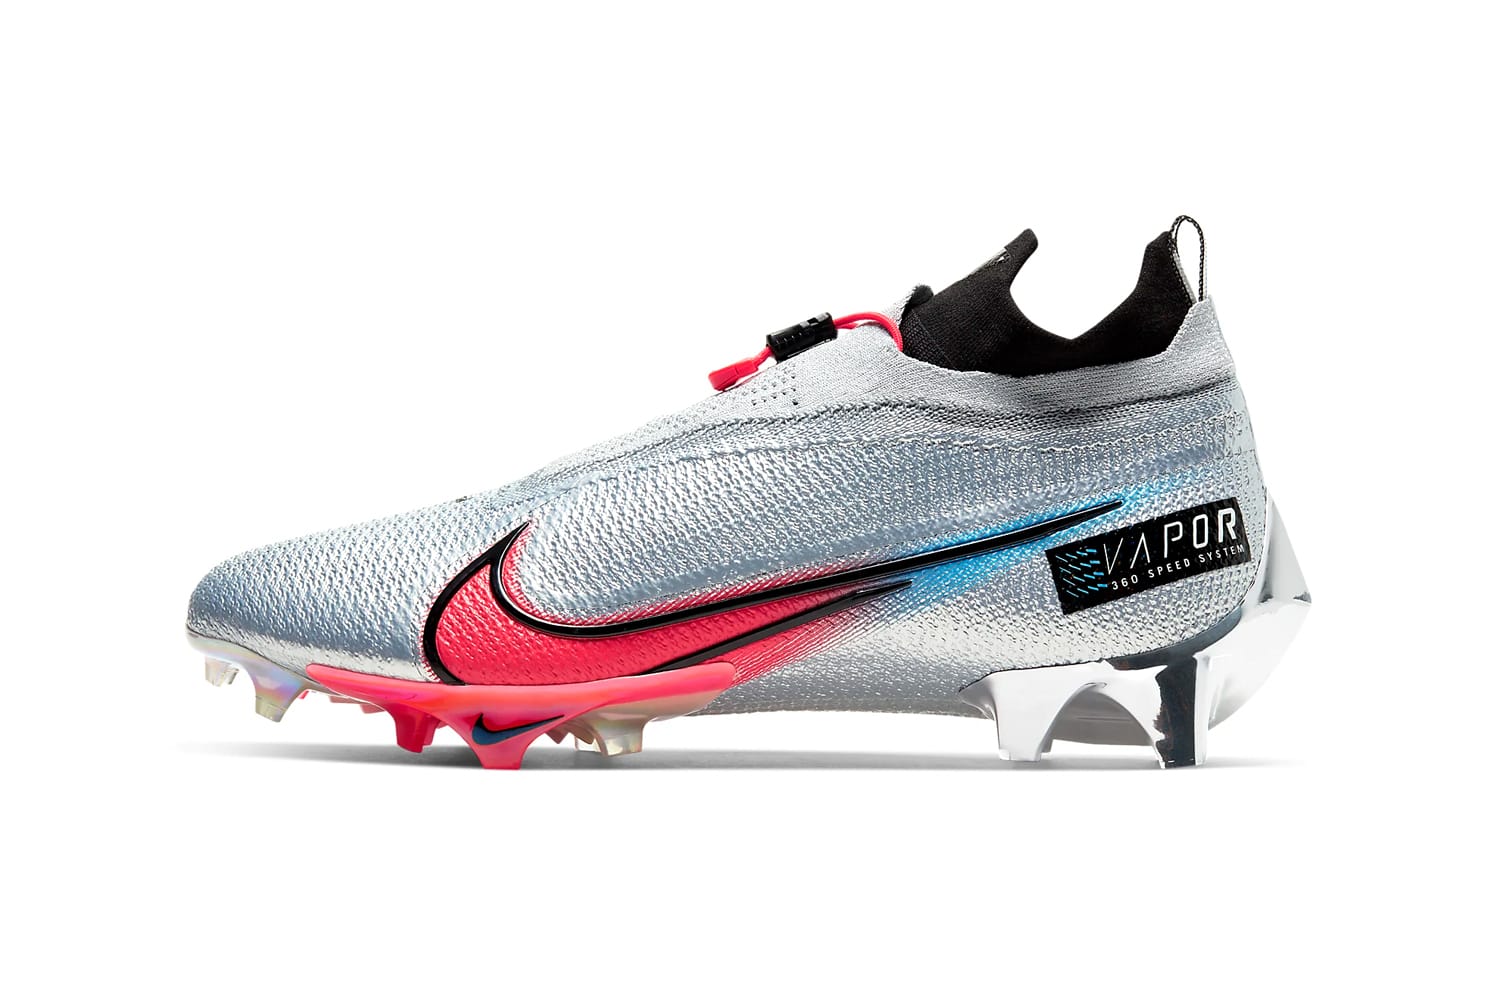 upcoming nike cleats